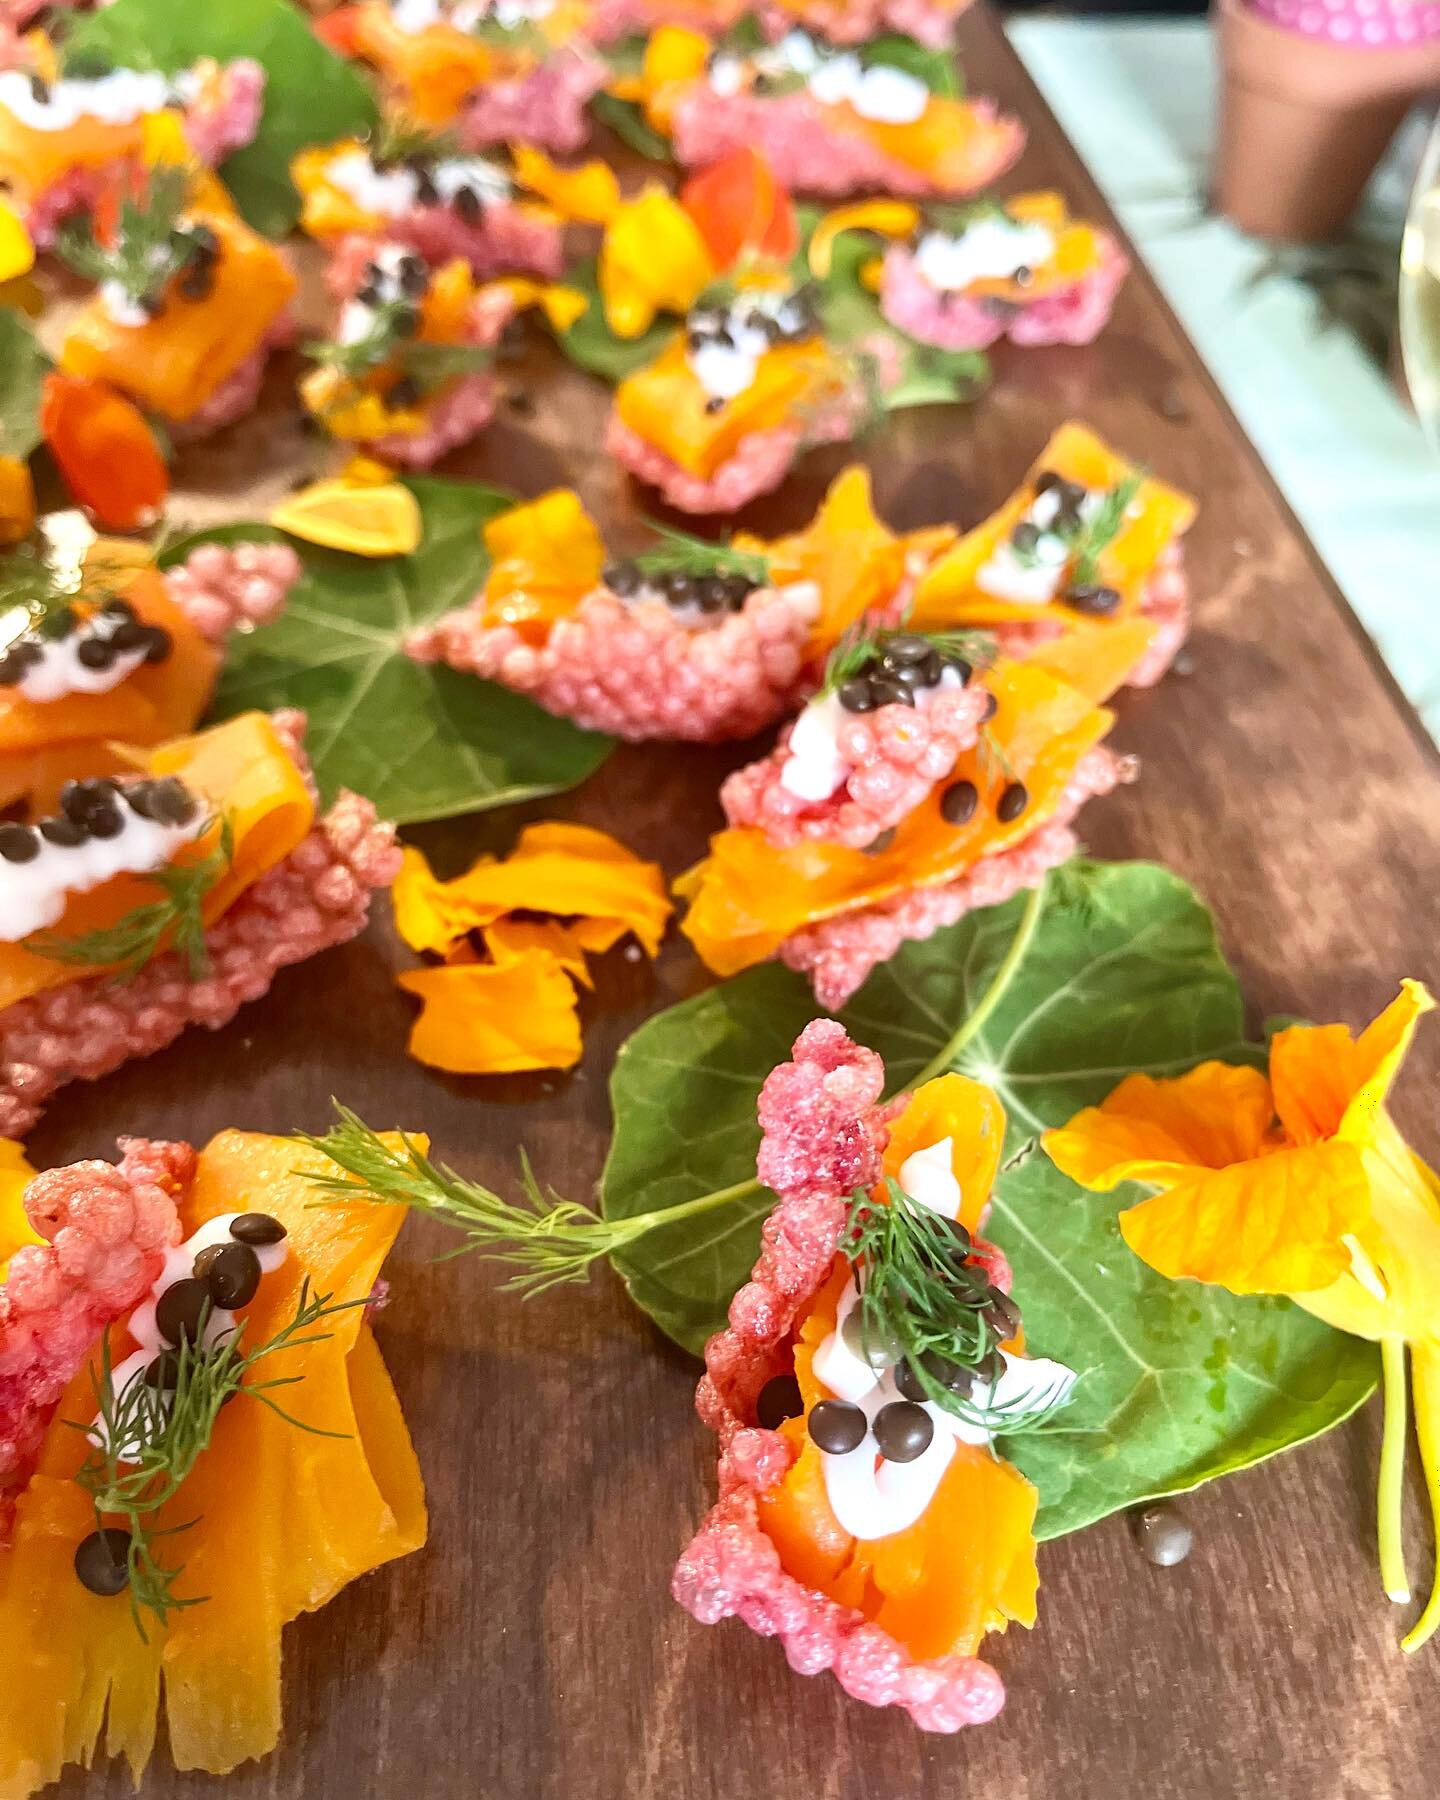 Who doesn&rsquo;t love a good crunch? Just like with flavours and presentation, texture is a critical aspect of creating a satisfying dish. 
I wanted a super crunchy base for my carrot lox so I came up with a beet infused, puffed tapioca cracker. The